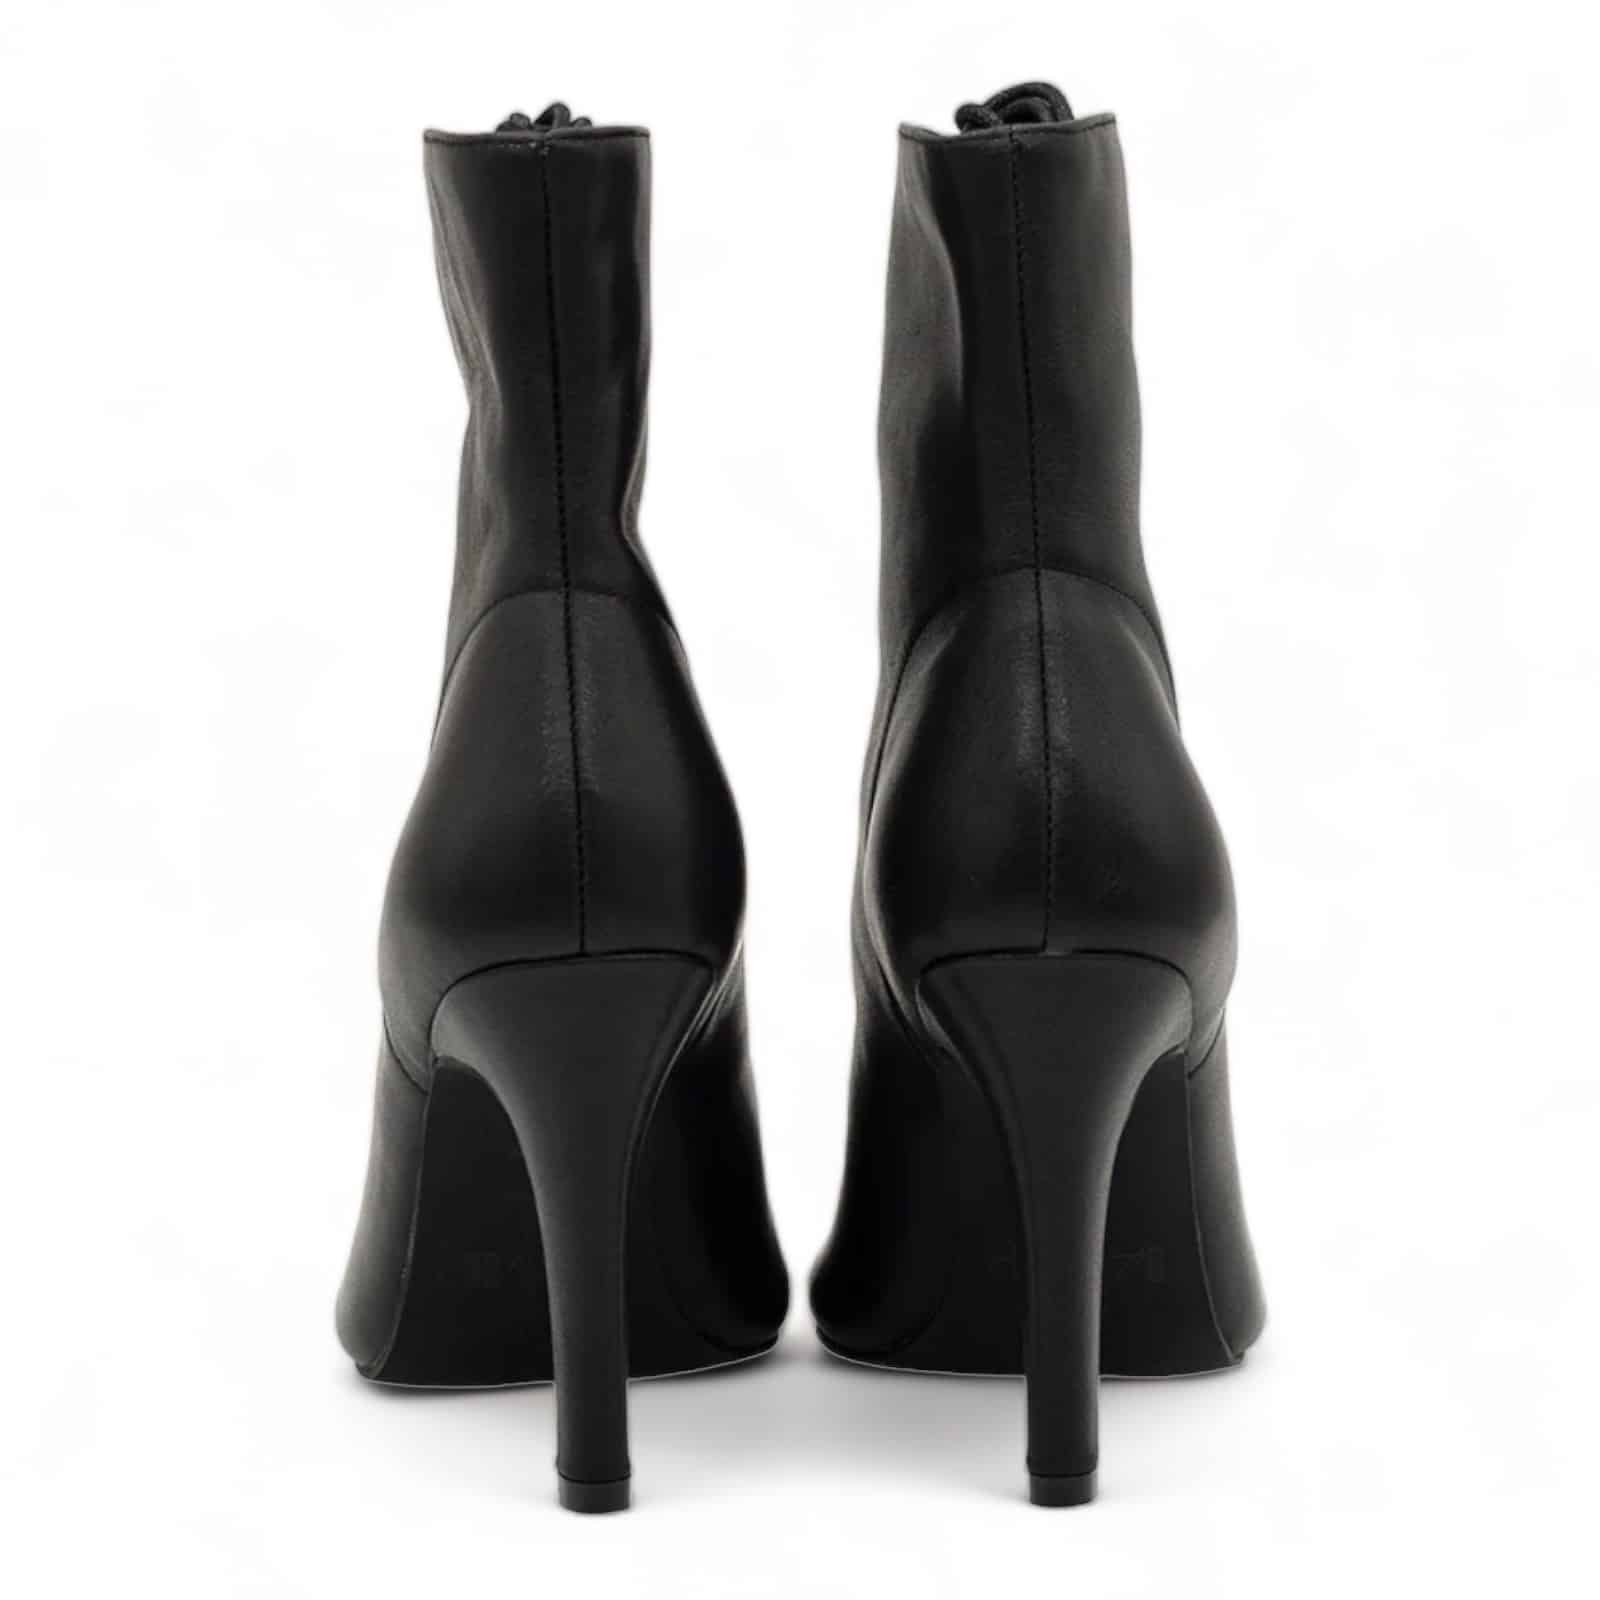 genuine leather dance heel boots for latin dancing